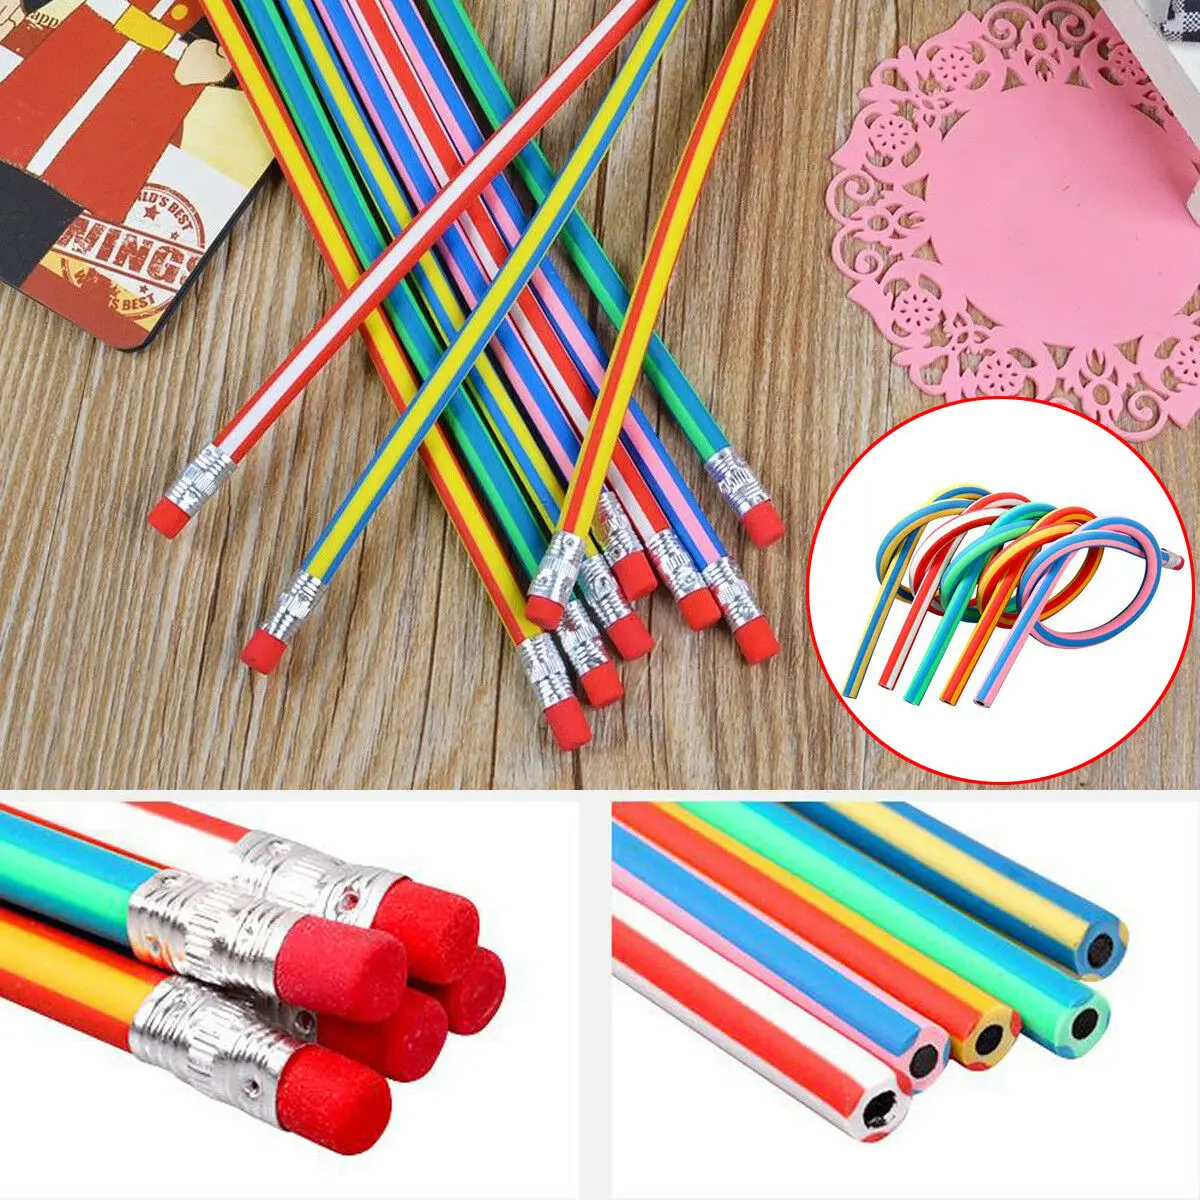 48 PCS Flexible Soft Pencil,Magic Bendable Pencils,Colorful Soft Pencils with Erasers for Kids,Back to School Gifts,Party Favors,Classroom Supplies,6 Colors 